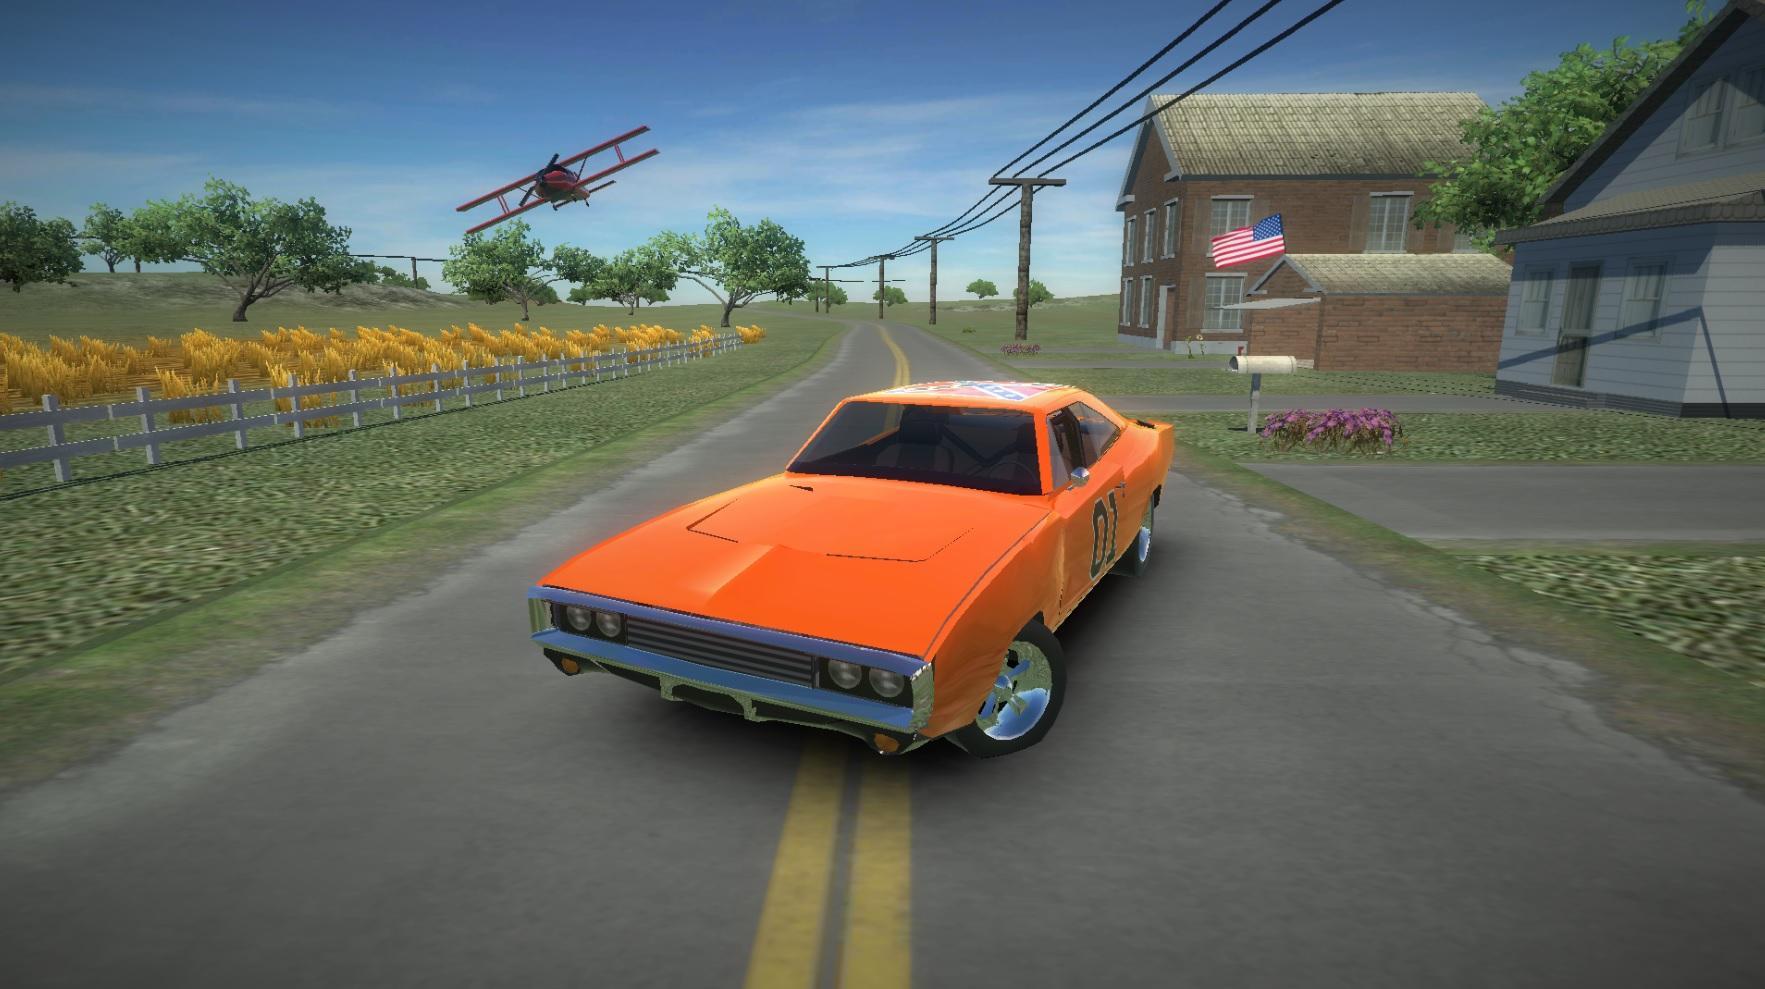 Classic American Muscle Cars 2 for Android - APK Download